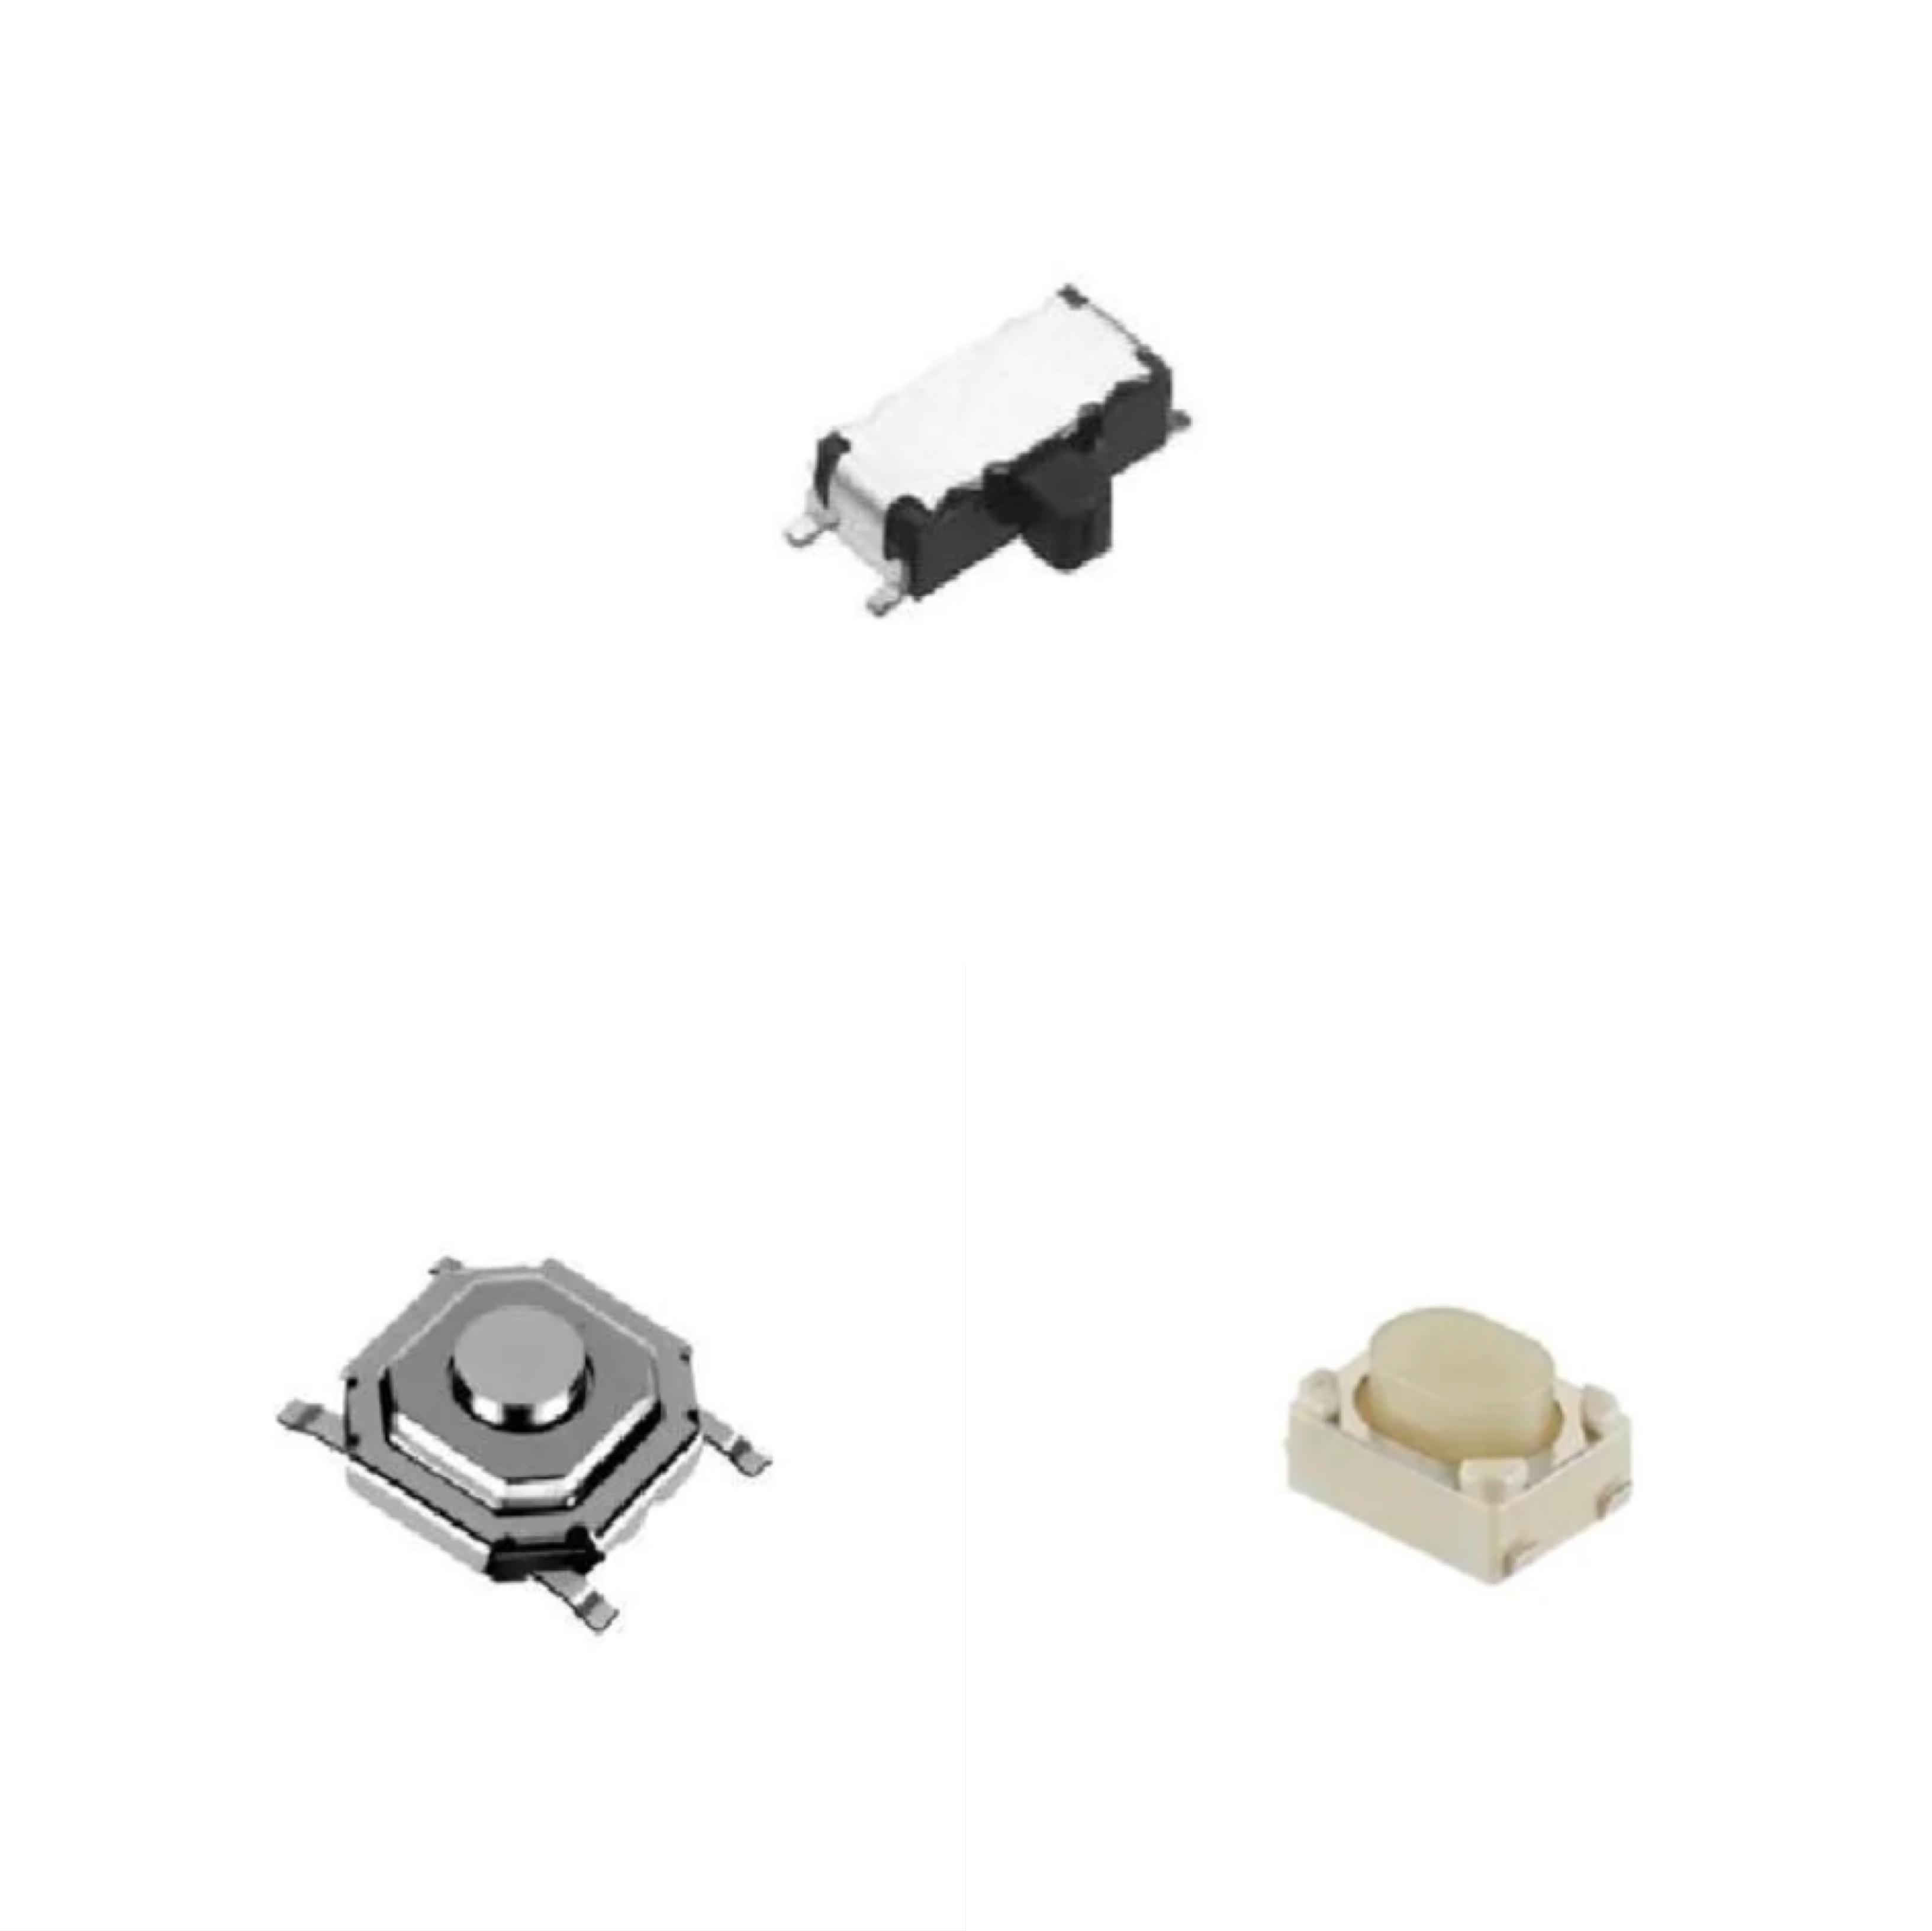 China wholesale Rf - SKHHLQA010 12.35*6.2*7.1 Vertical and side press SPST 50mA   12VDC Side operation Round Button TThrough Hole Tactile Switches RoHS – Ronghua